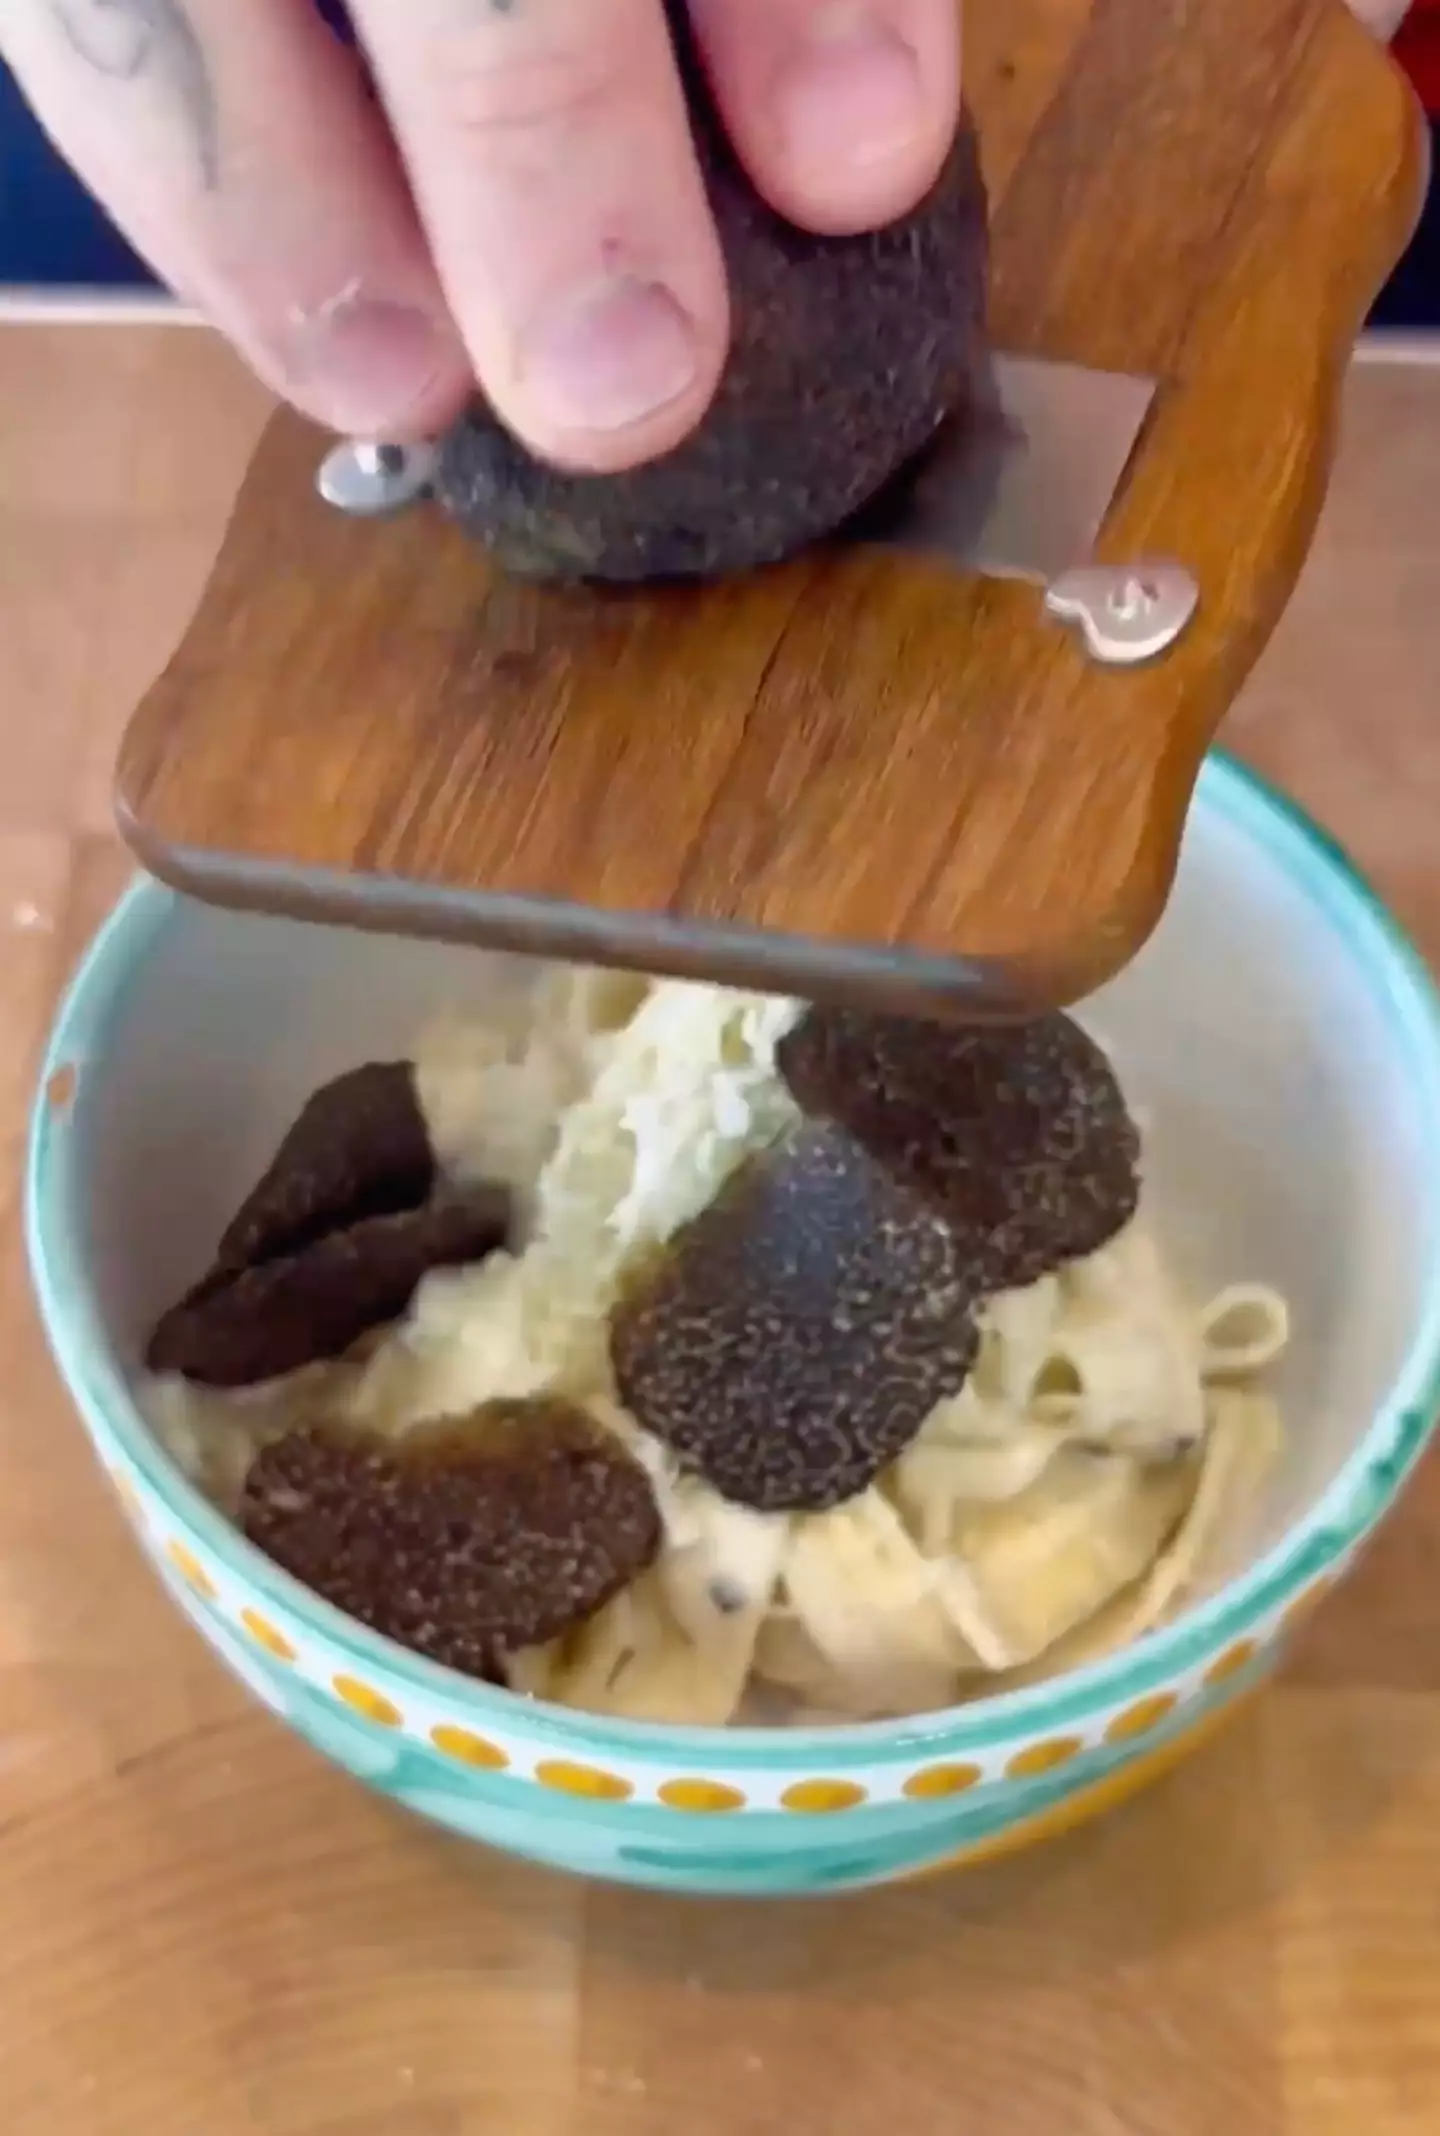 There's 'no such thing' as too much truffle in Brooklyn's house.